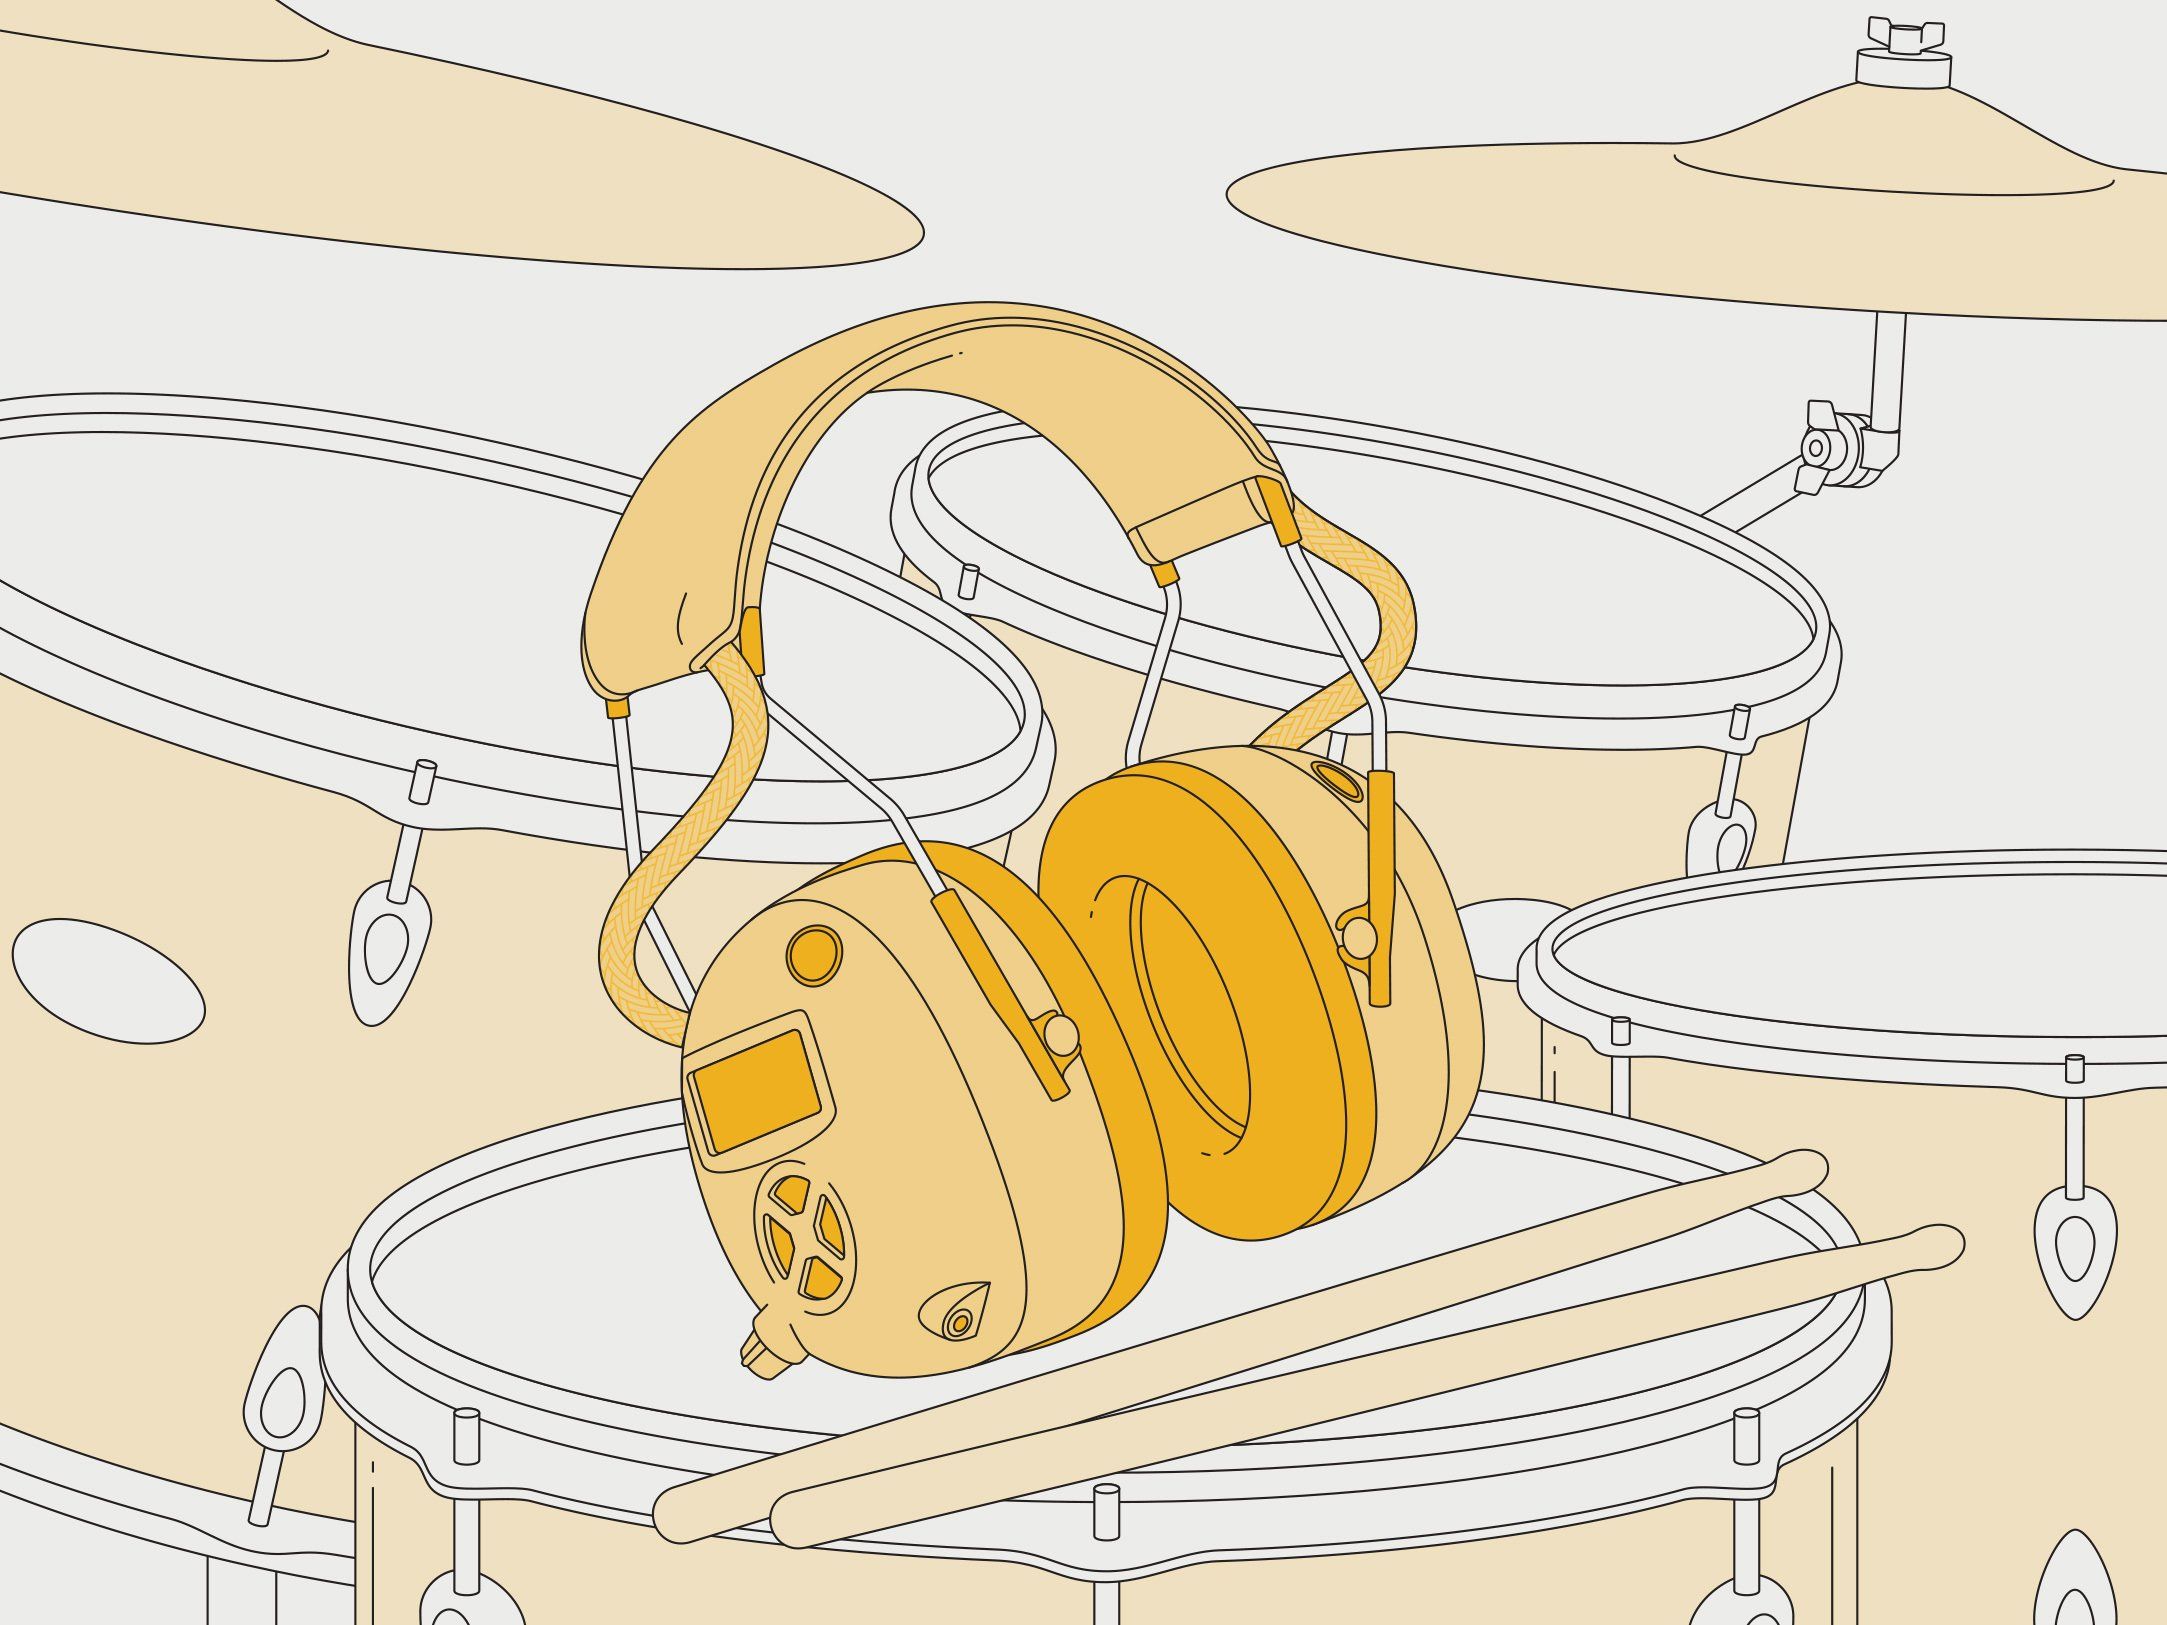 A pair headphones sitting on a drum set with embedded microphones on each side.